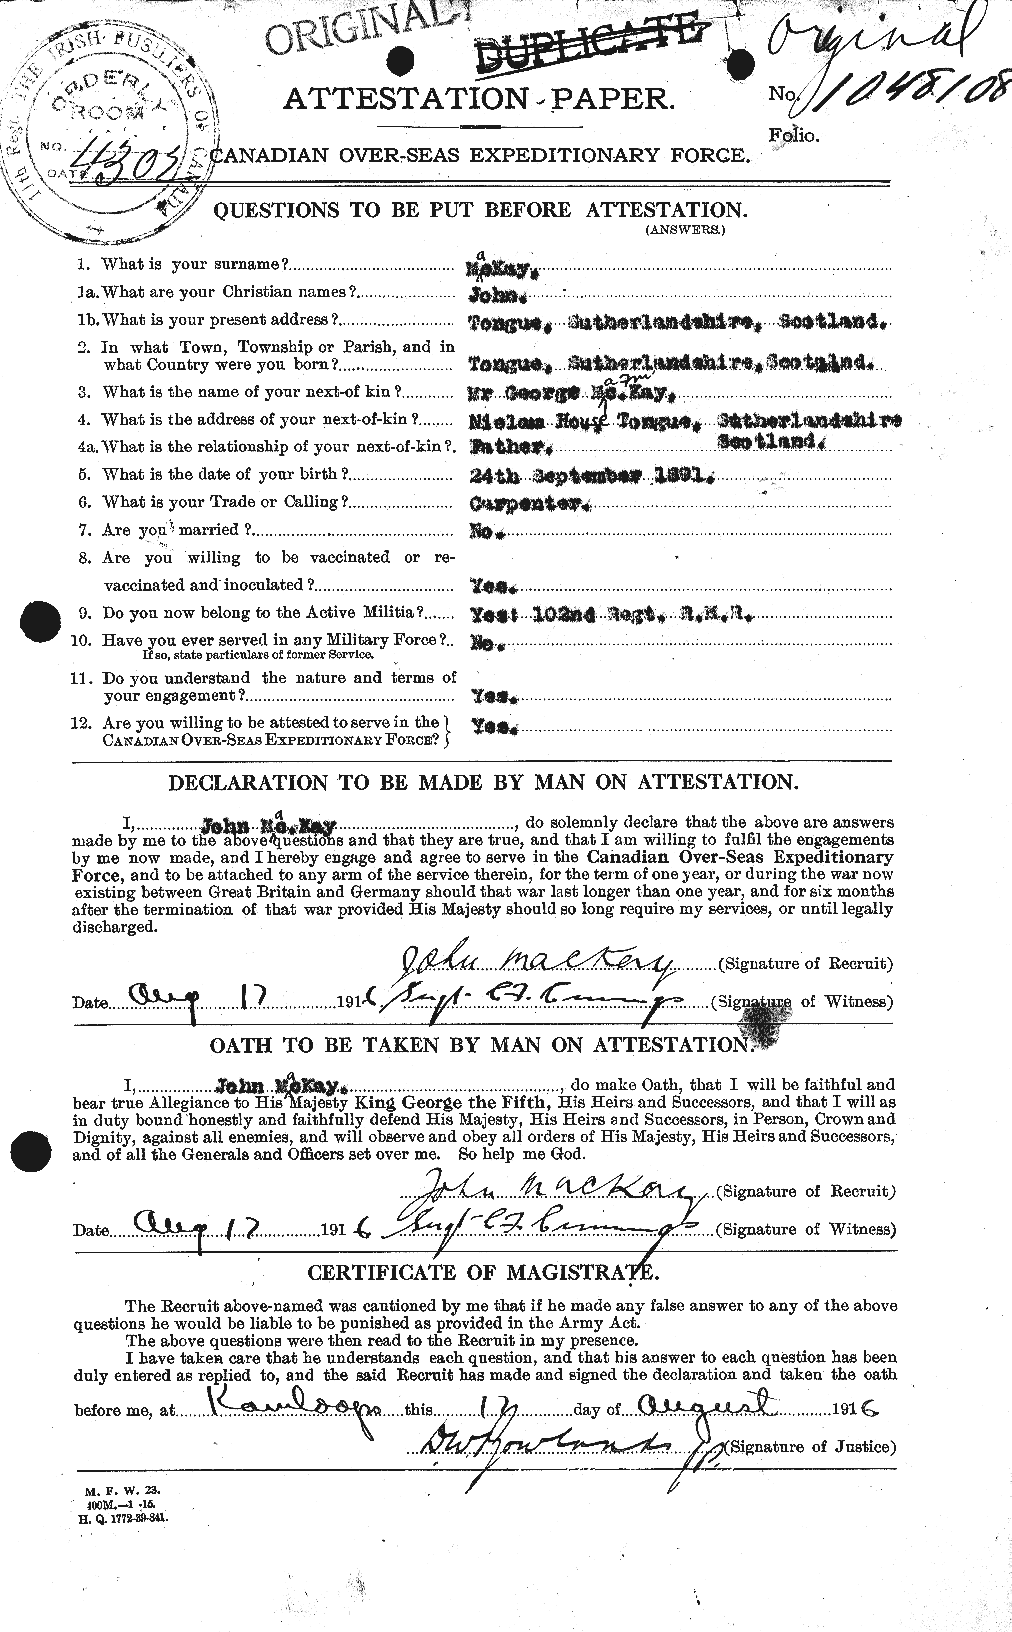 Personnel Records of the First World War - CEF 527002a